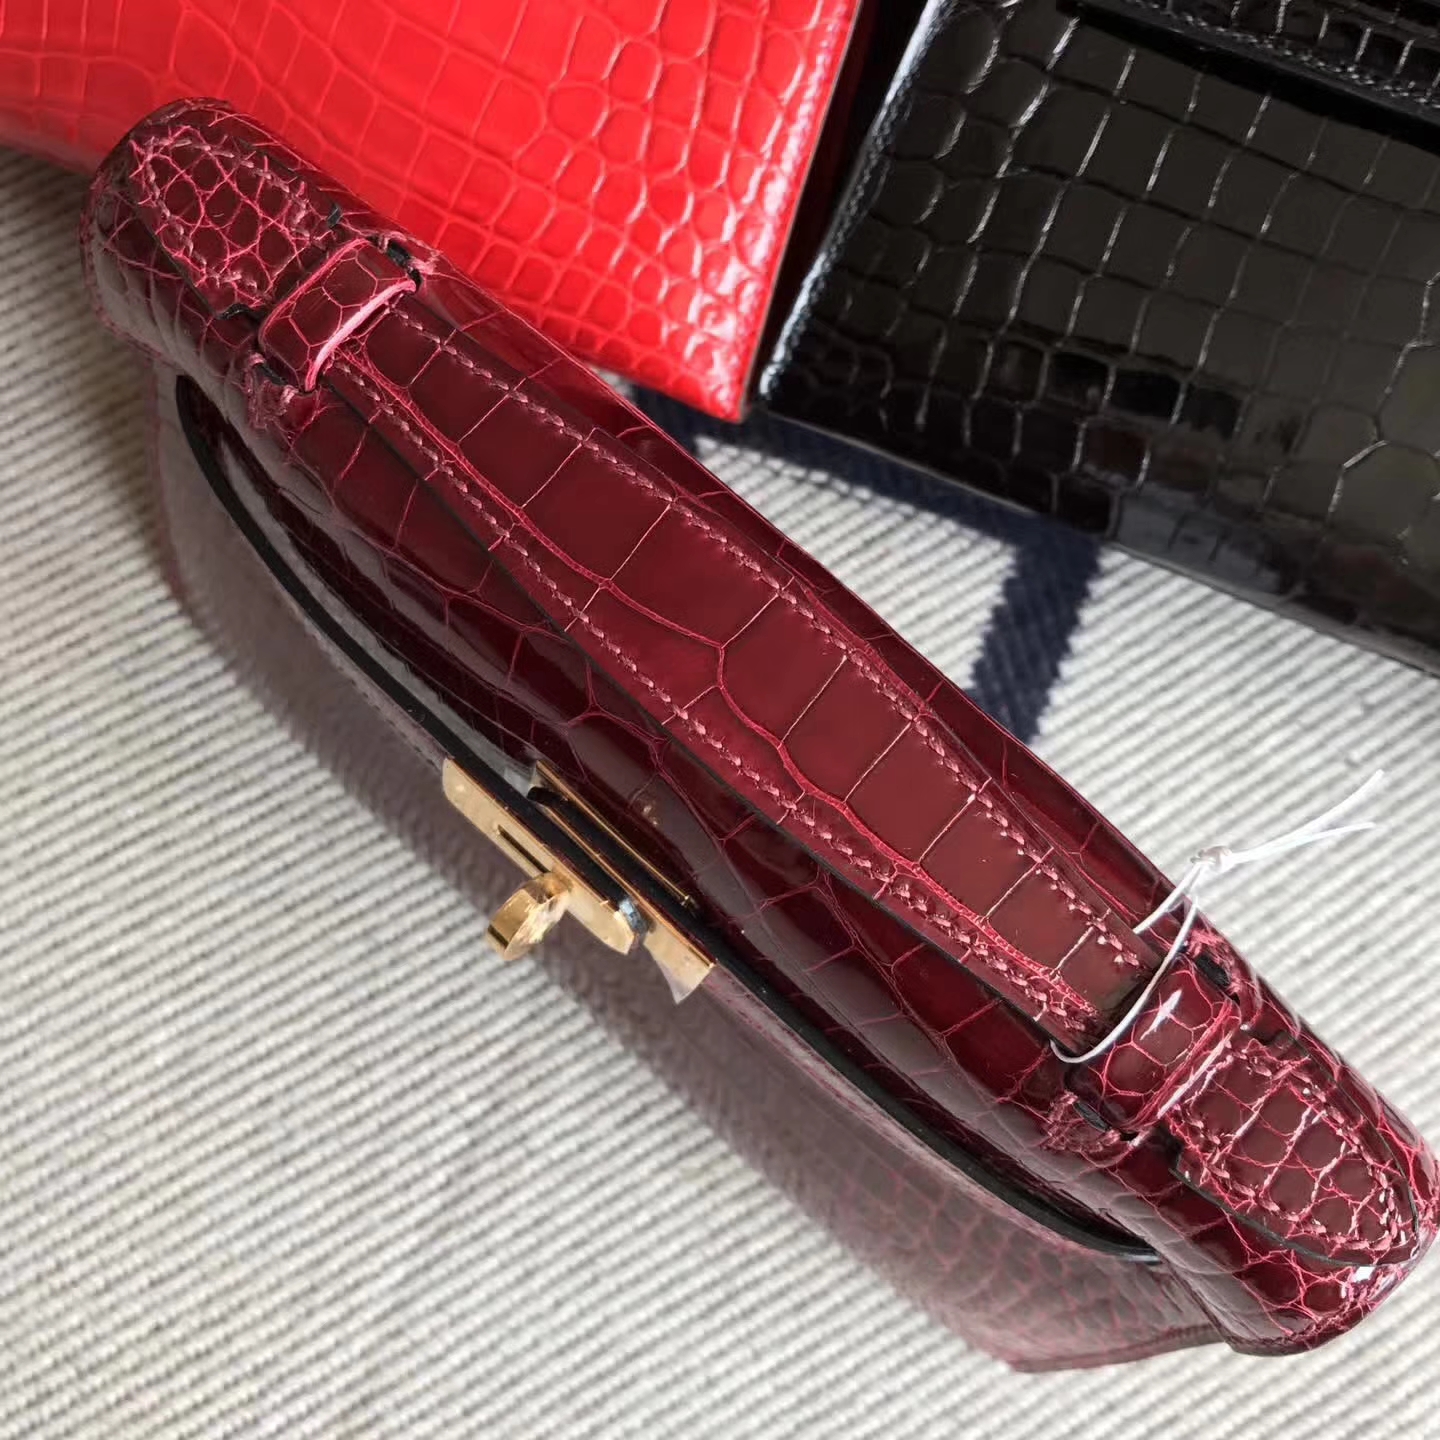 New Hermes Shiny Alligator Crocodile Minikelly22cm Clutch Bag in F5 Bourgogne Red